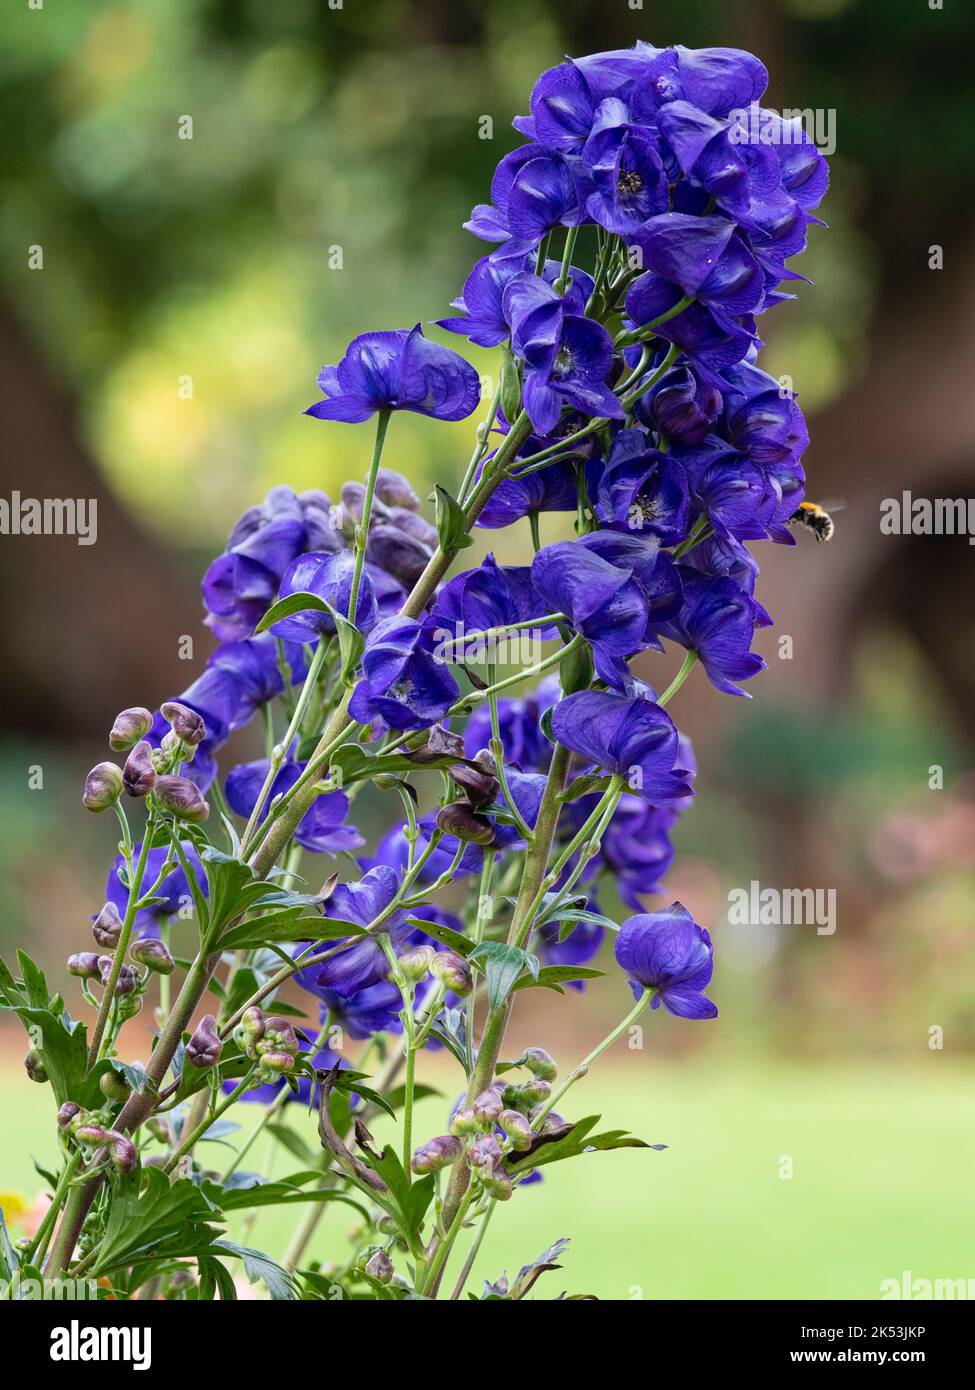 Hooded blue flowers of the autumn blooming hardy perennial, Aconitum carmichaelii 'Royal Flush' Stock Photo